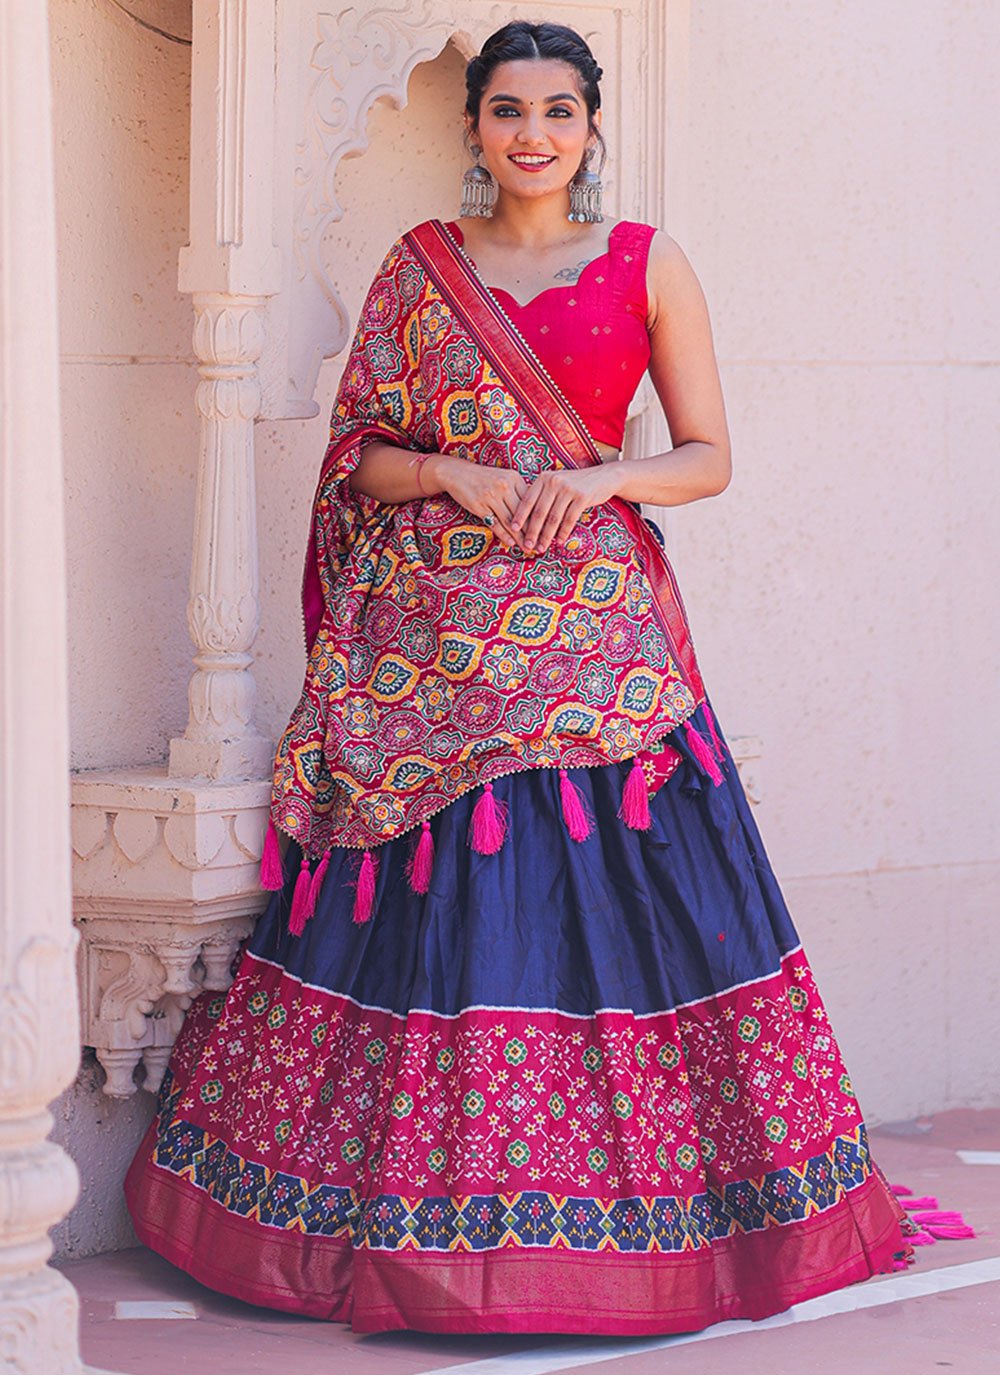 How To Style Chaniya Choli? 30 Awesome Tips For You! - Baggout